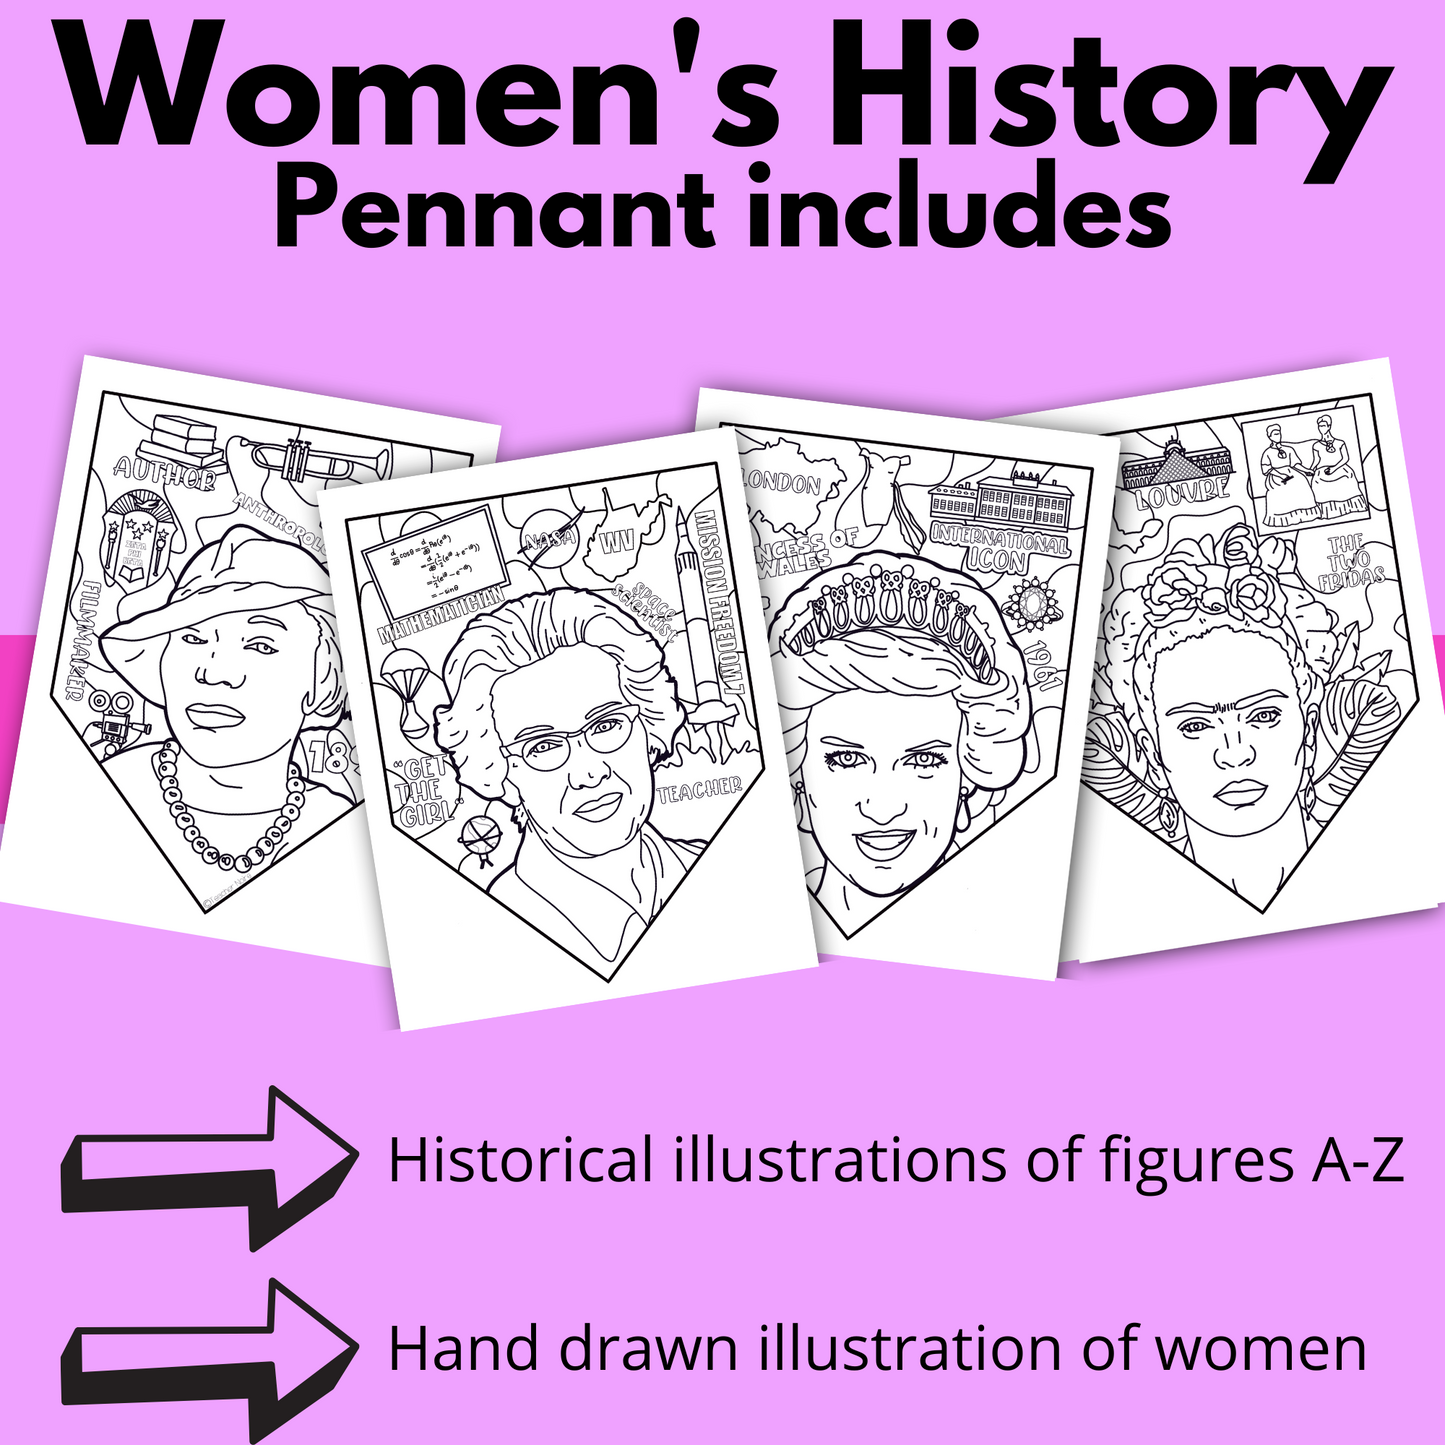 Women's History Project-Pennant & One Pager